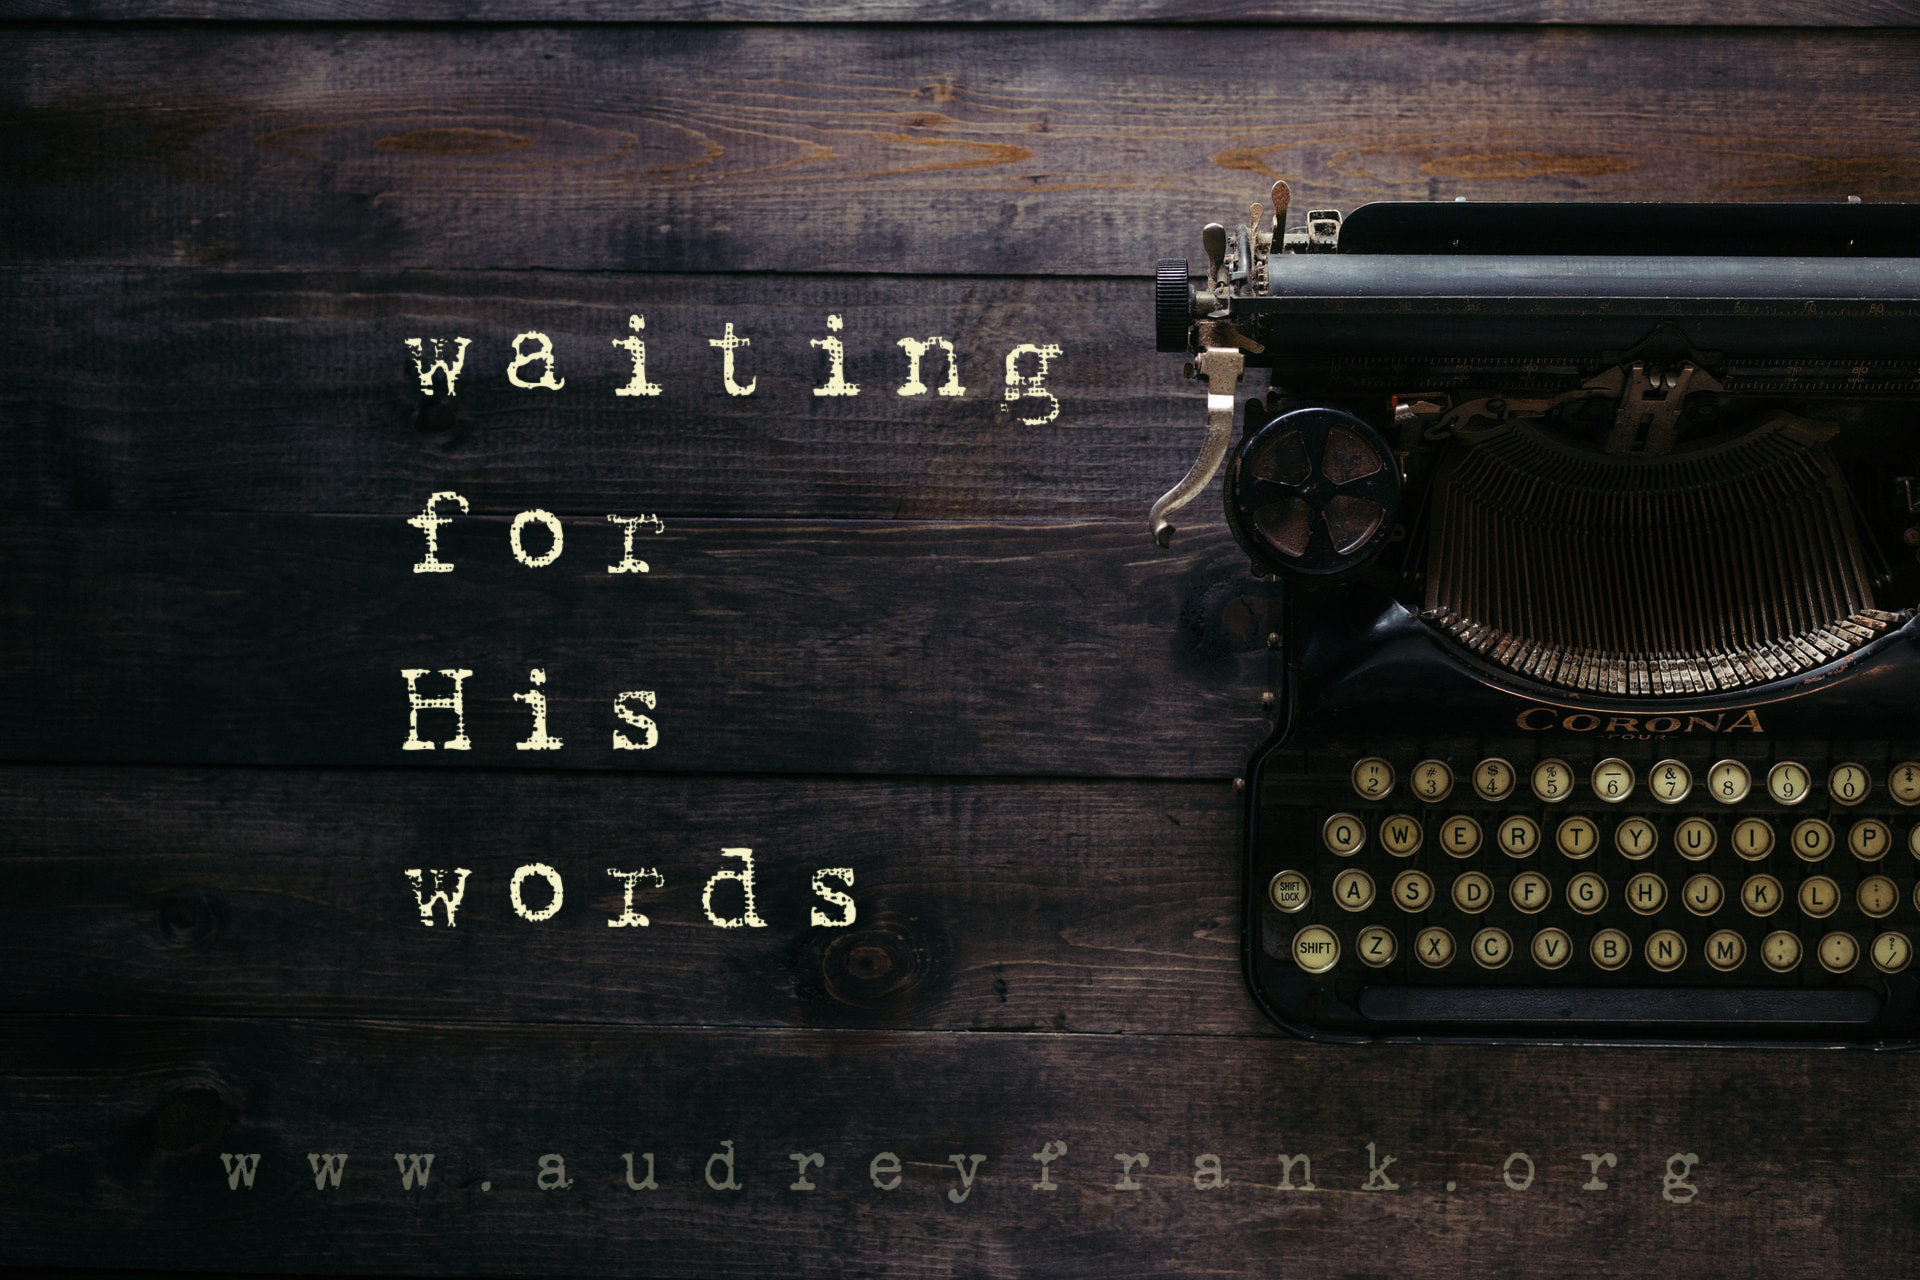 a vintage typewriter and the words "Waiting for His words," describing the subject of the post.